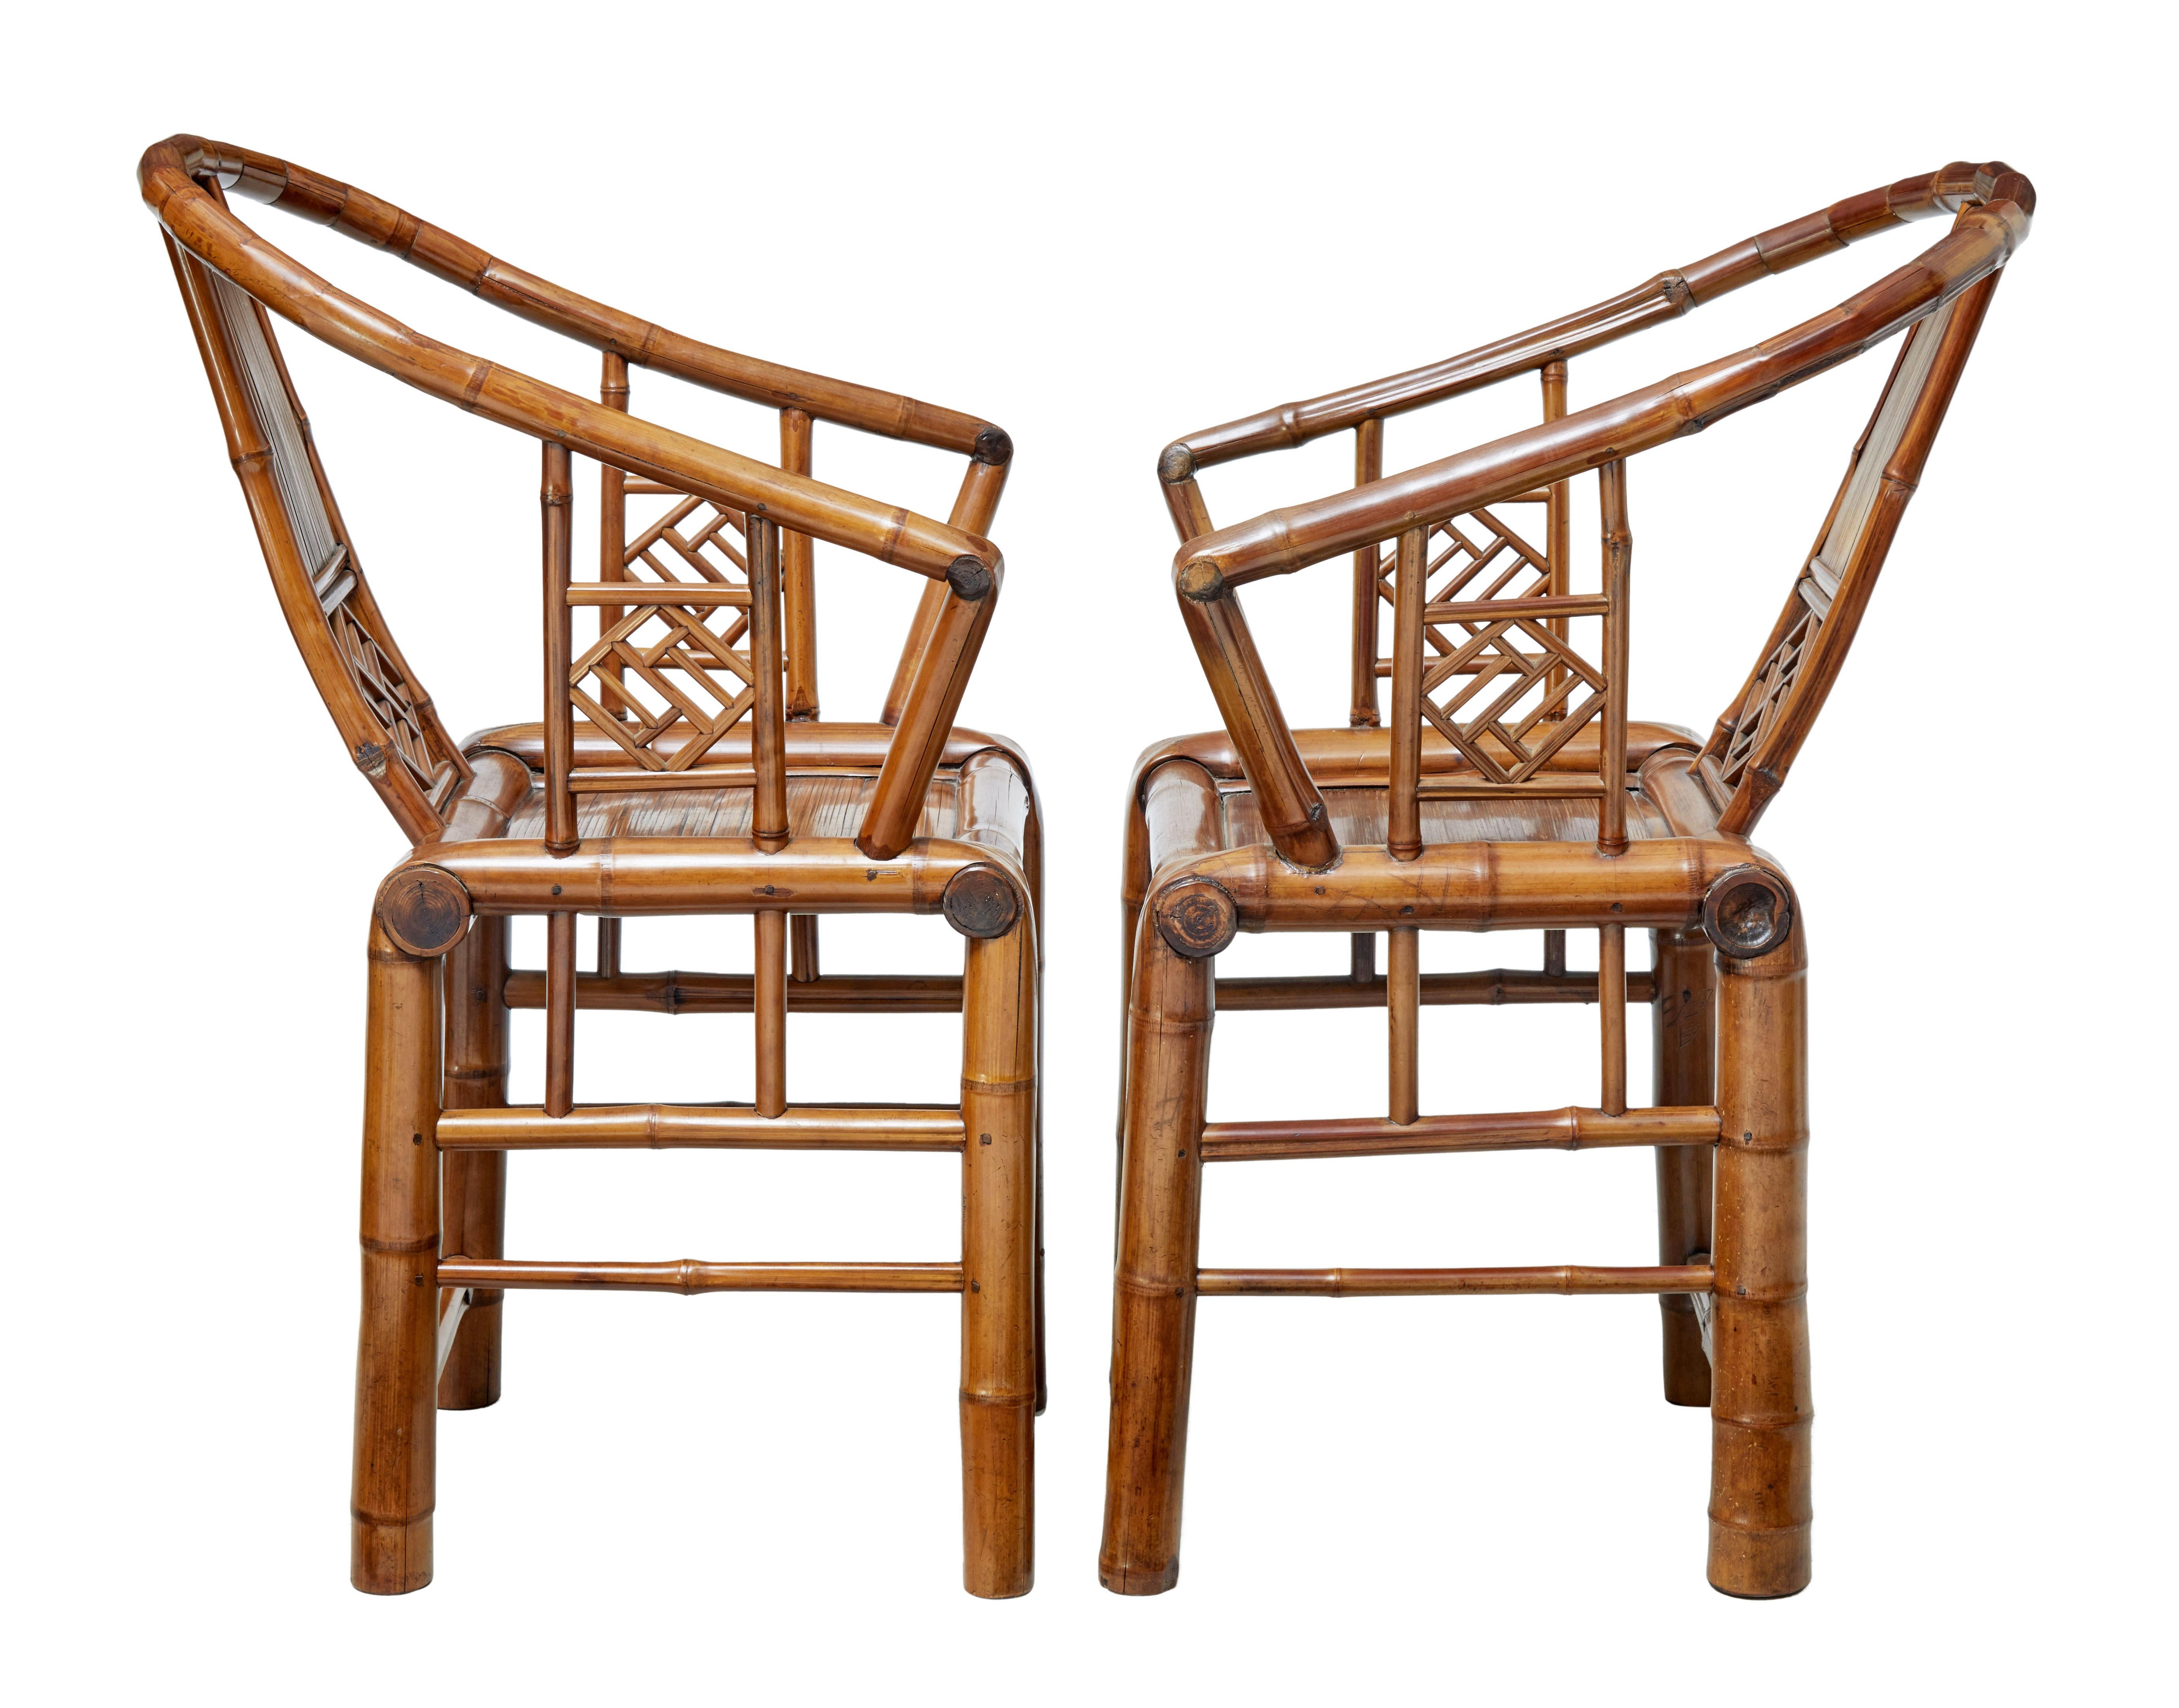 Hand-Crafted Pair of Early 20th Century Chinese Bamboo Armchairs